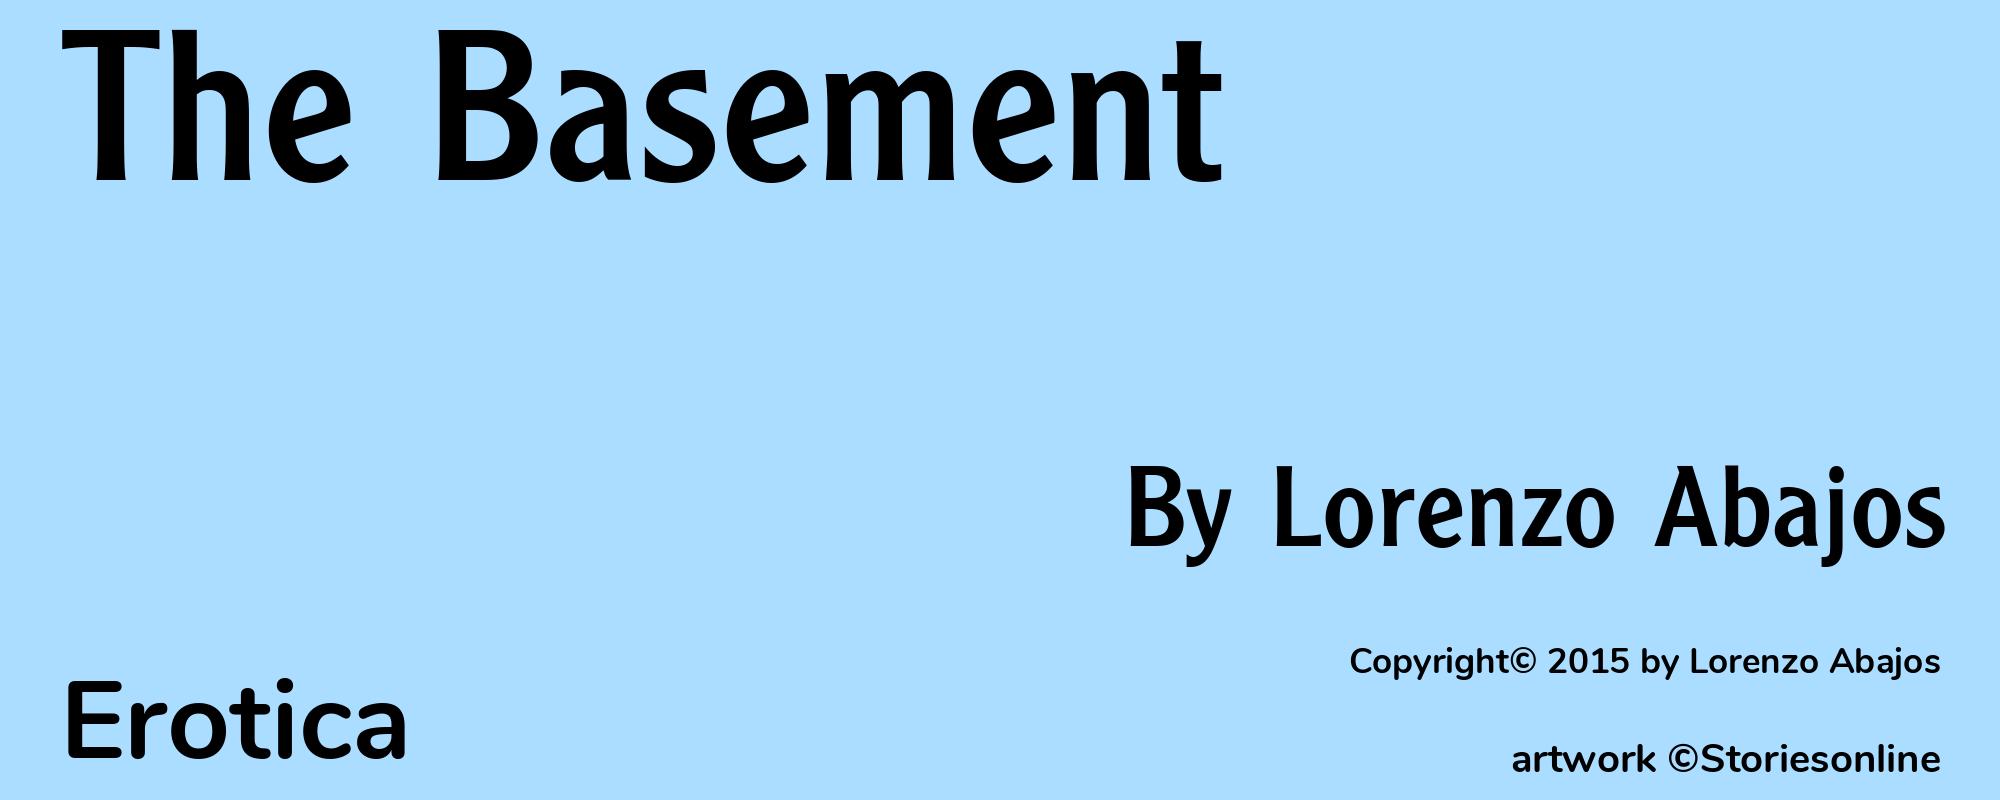 The Basement - Cover